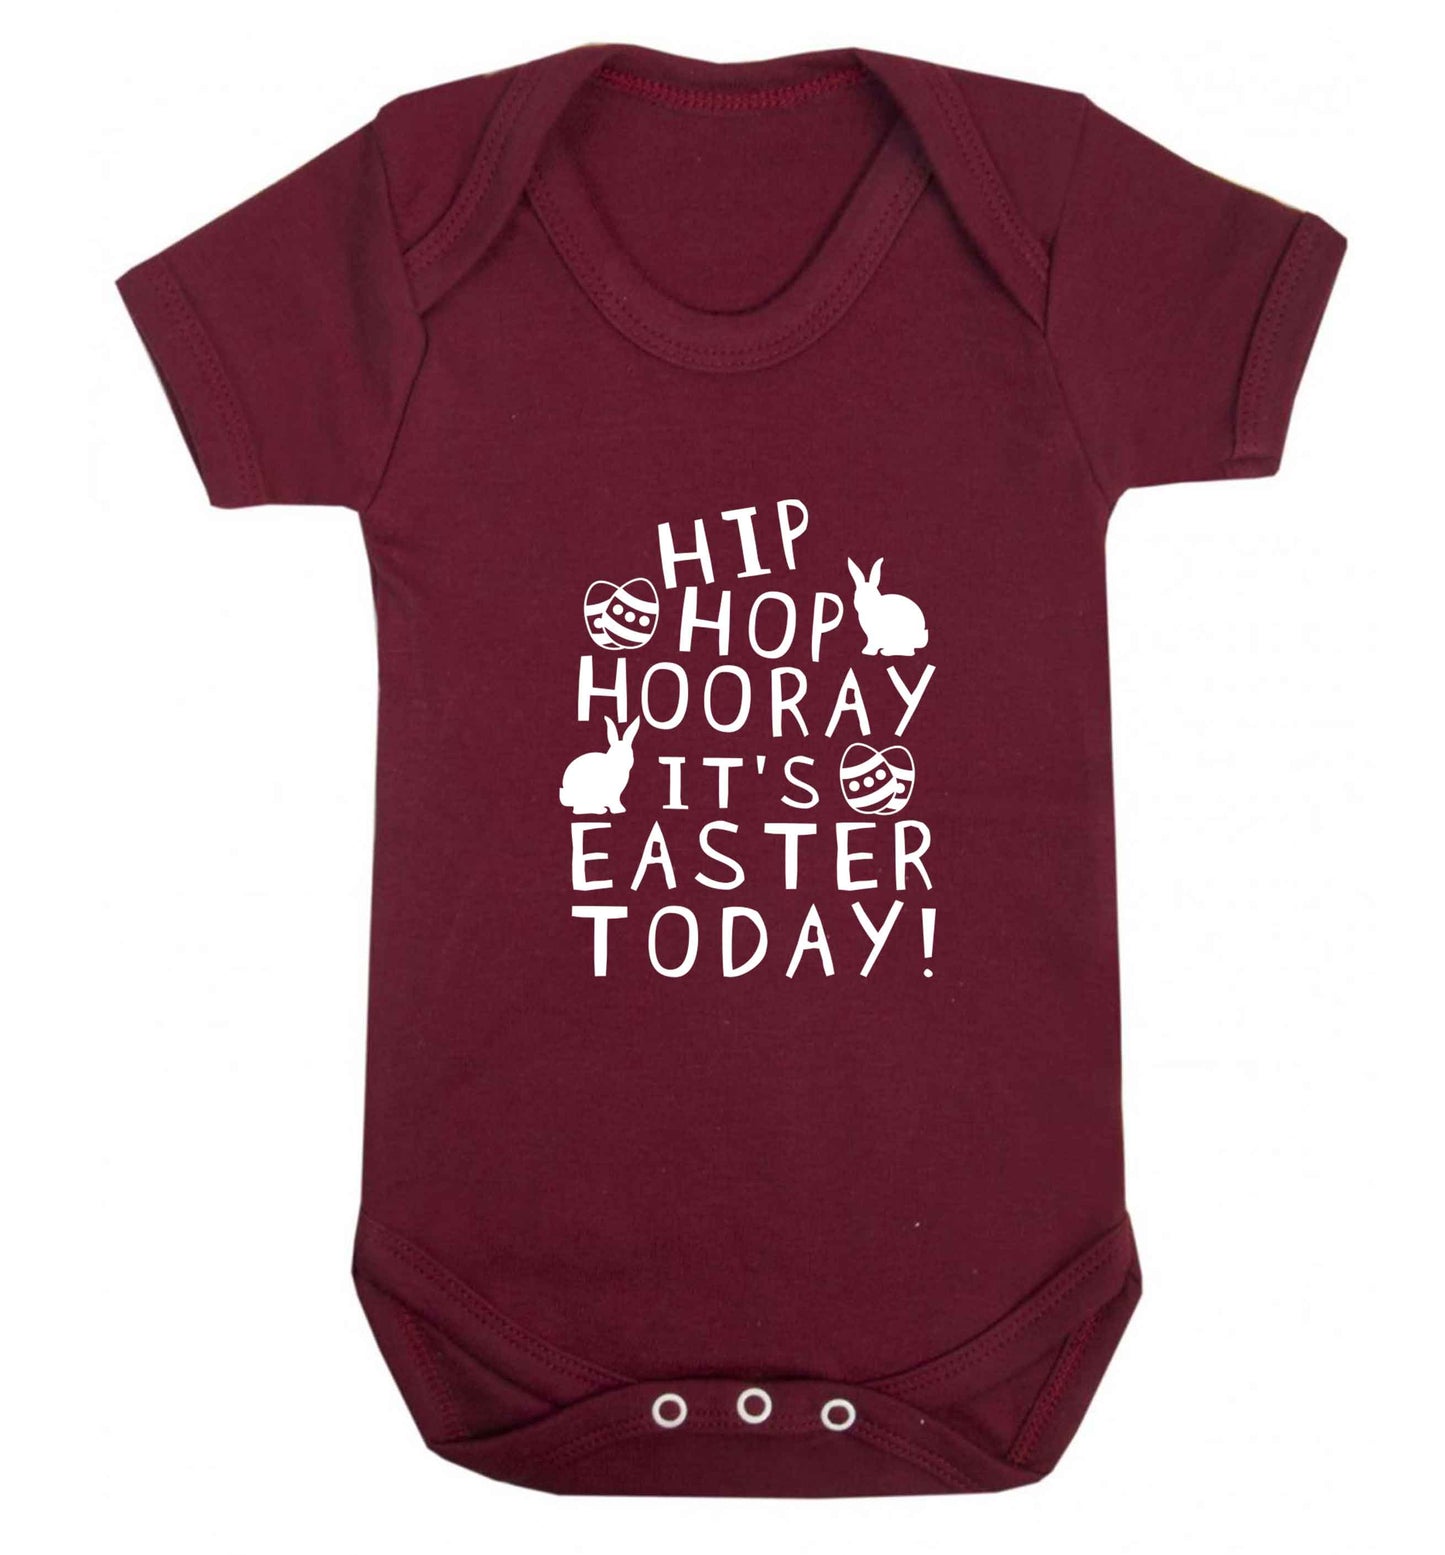 Hip hip hooray it's Easter today! baby vest maroon 18-24 months